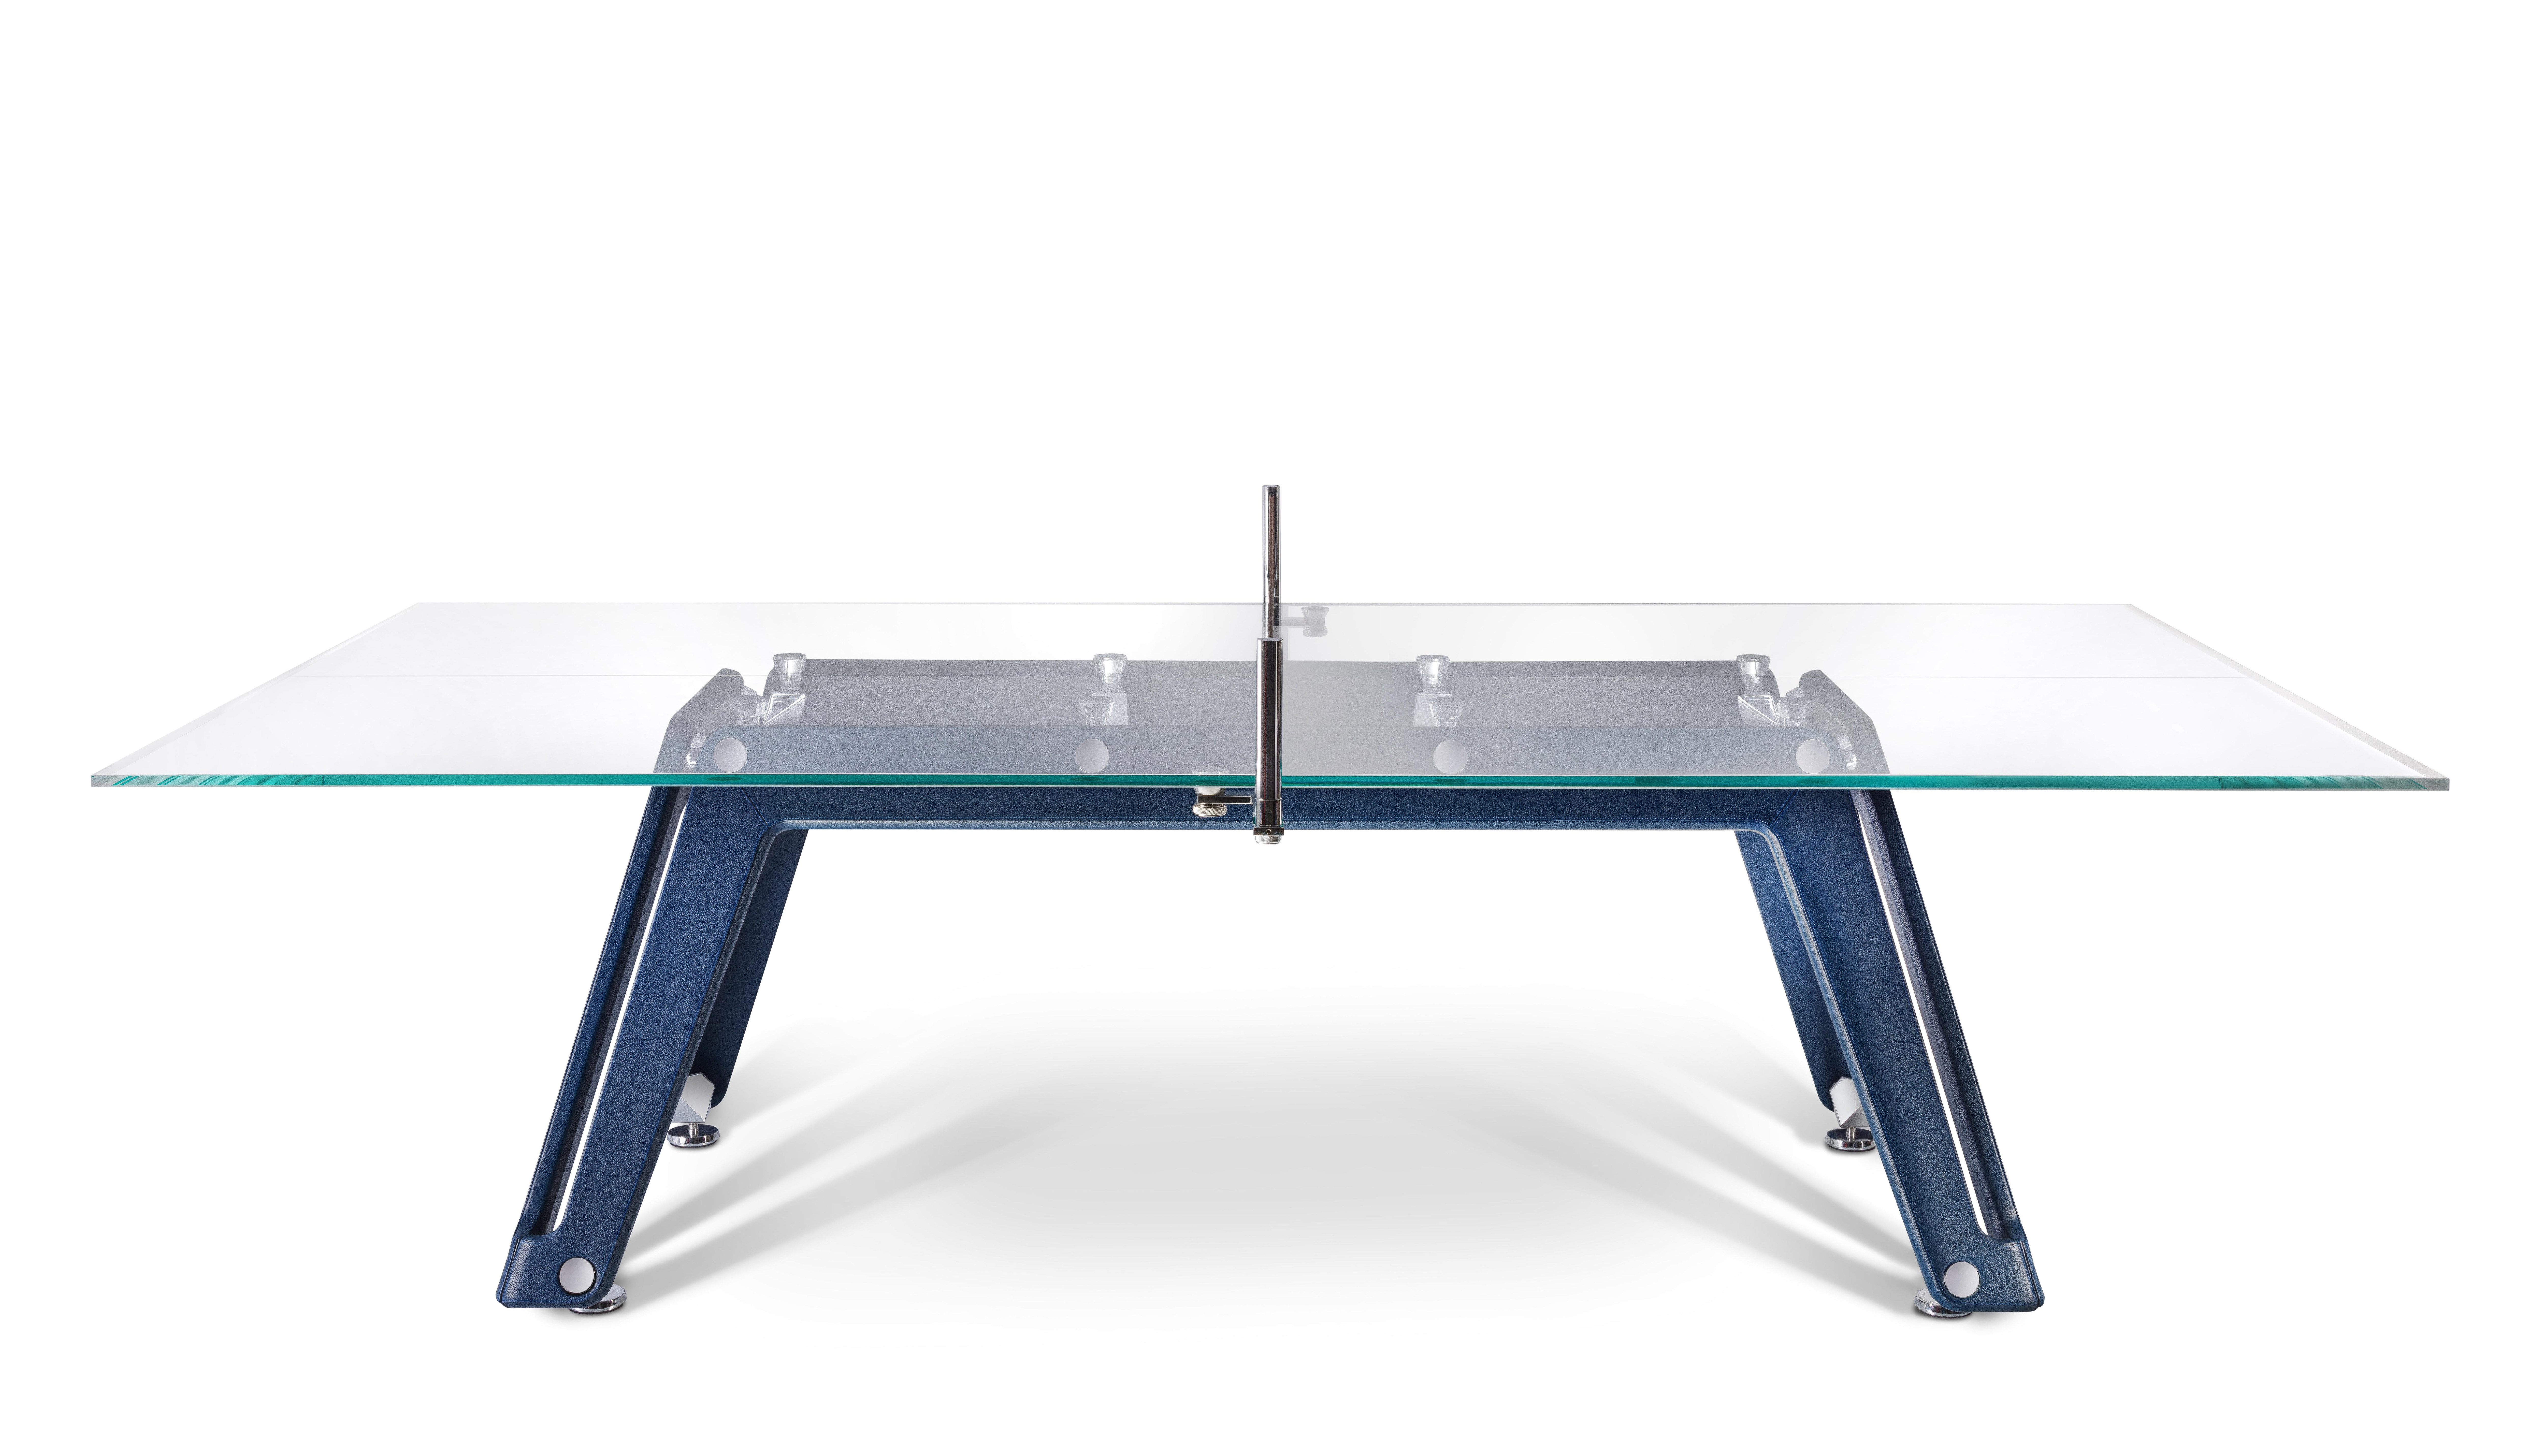 The Lungolinea Leather ping pong table is a vision, a desire to ambitiously reinterpret the classics. It demonstrates the sophistication and ingenuity of Italian design and craftsmanship in the game of table tennis. 

This edition features a